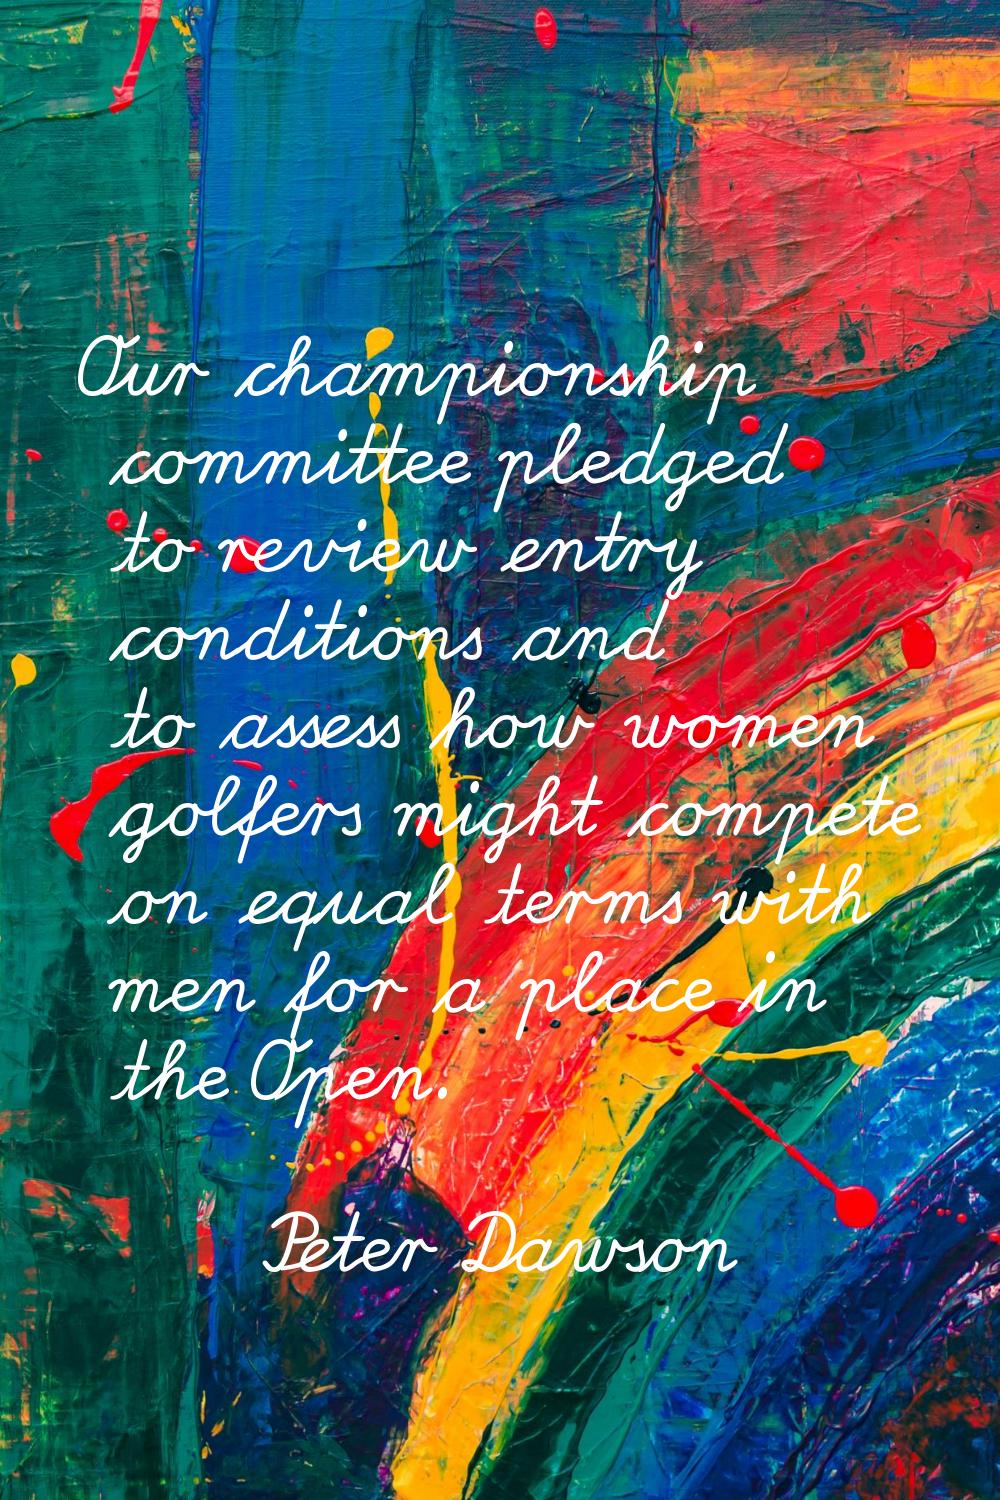 Our championship committee pledged to review entry conditions and to assess how women golfers might